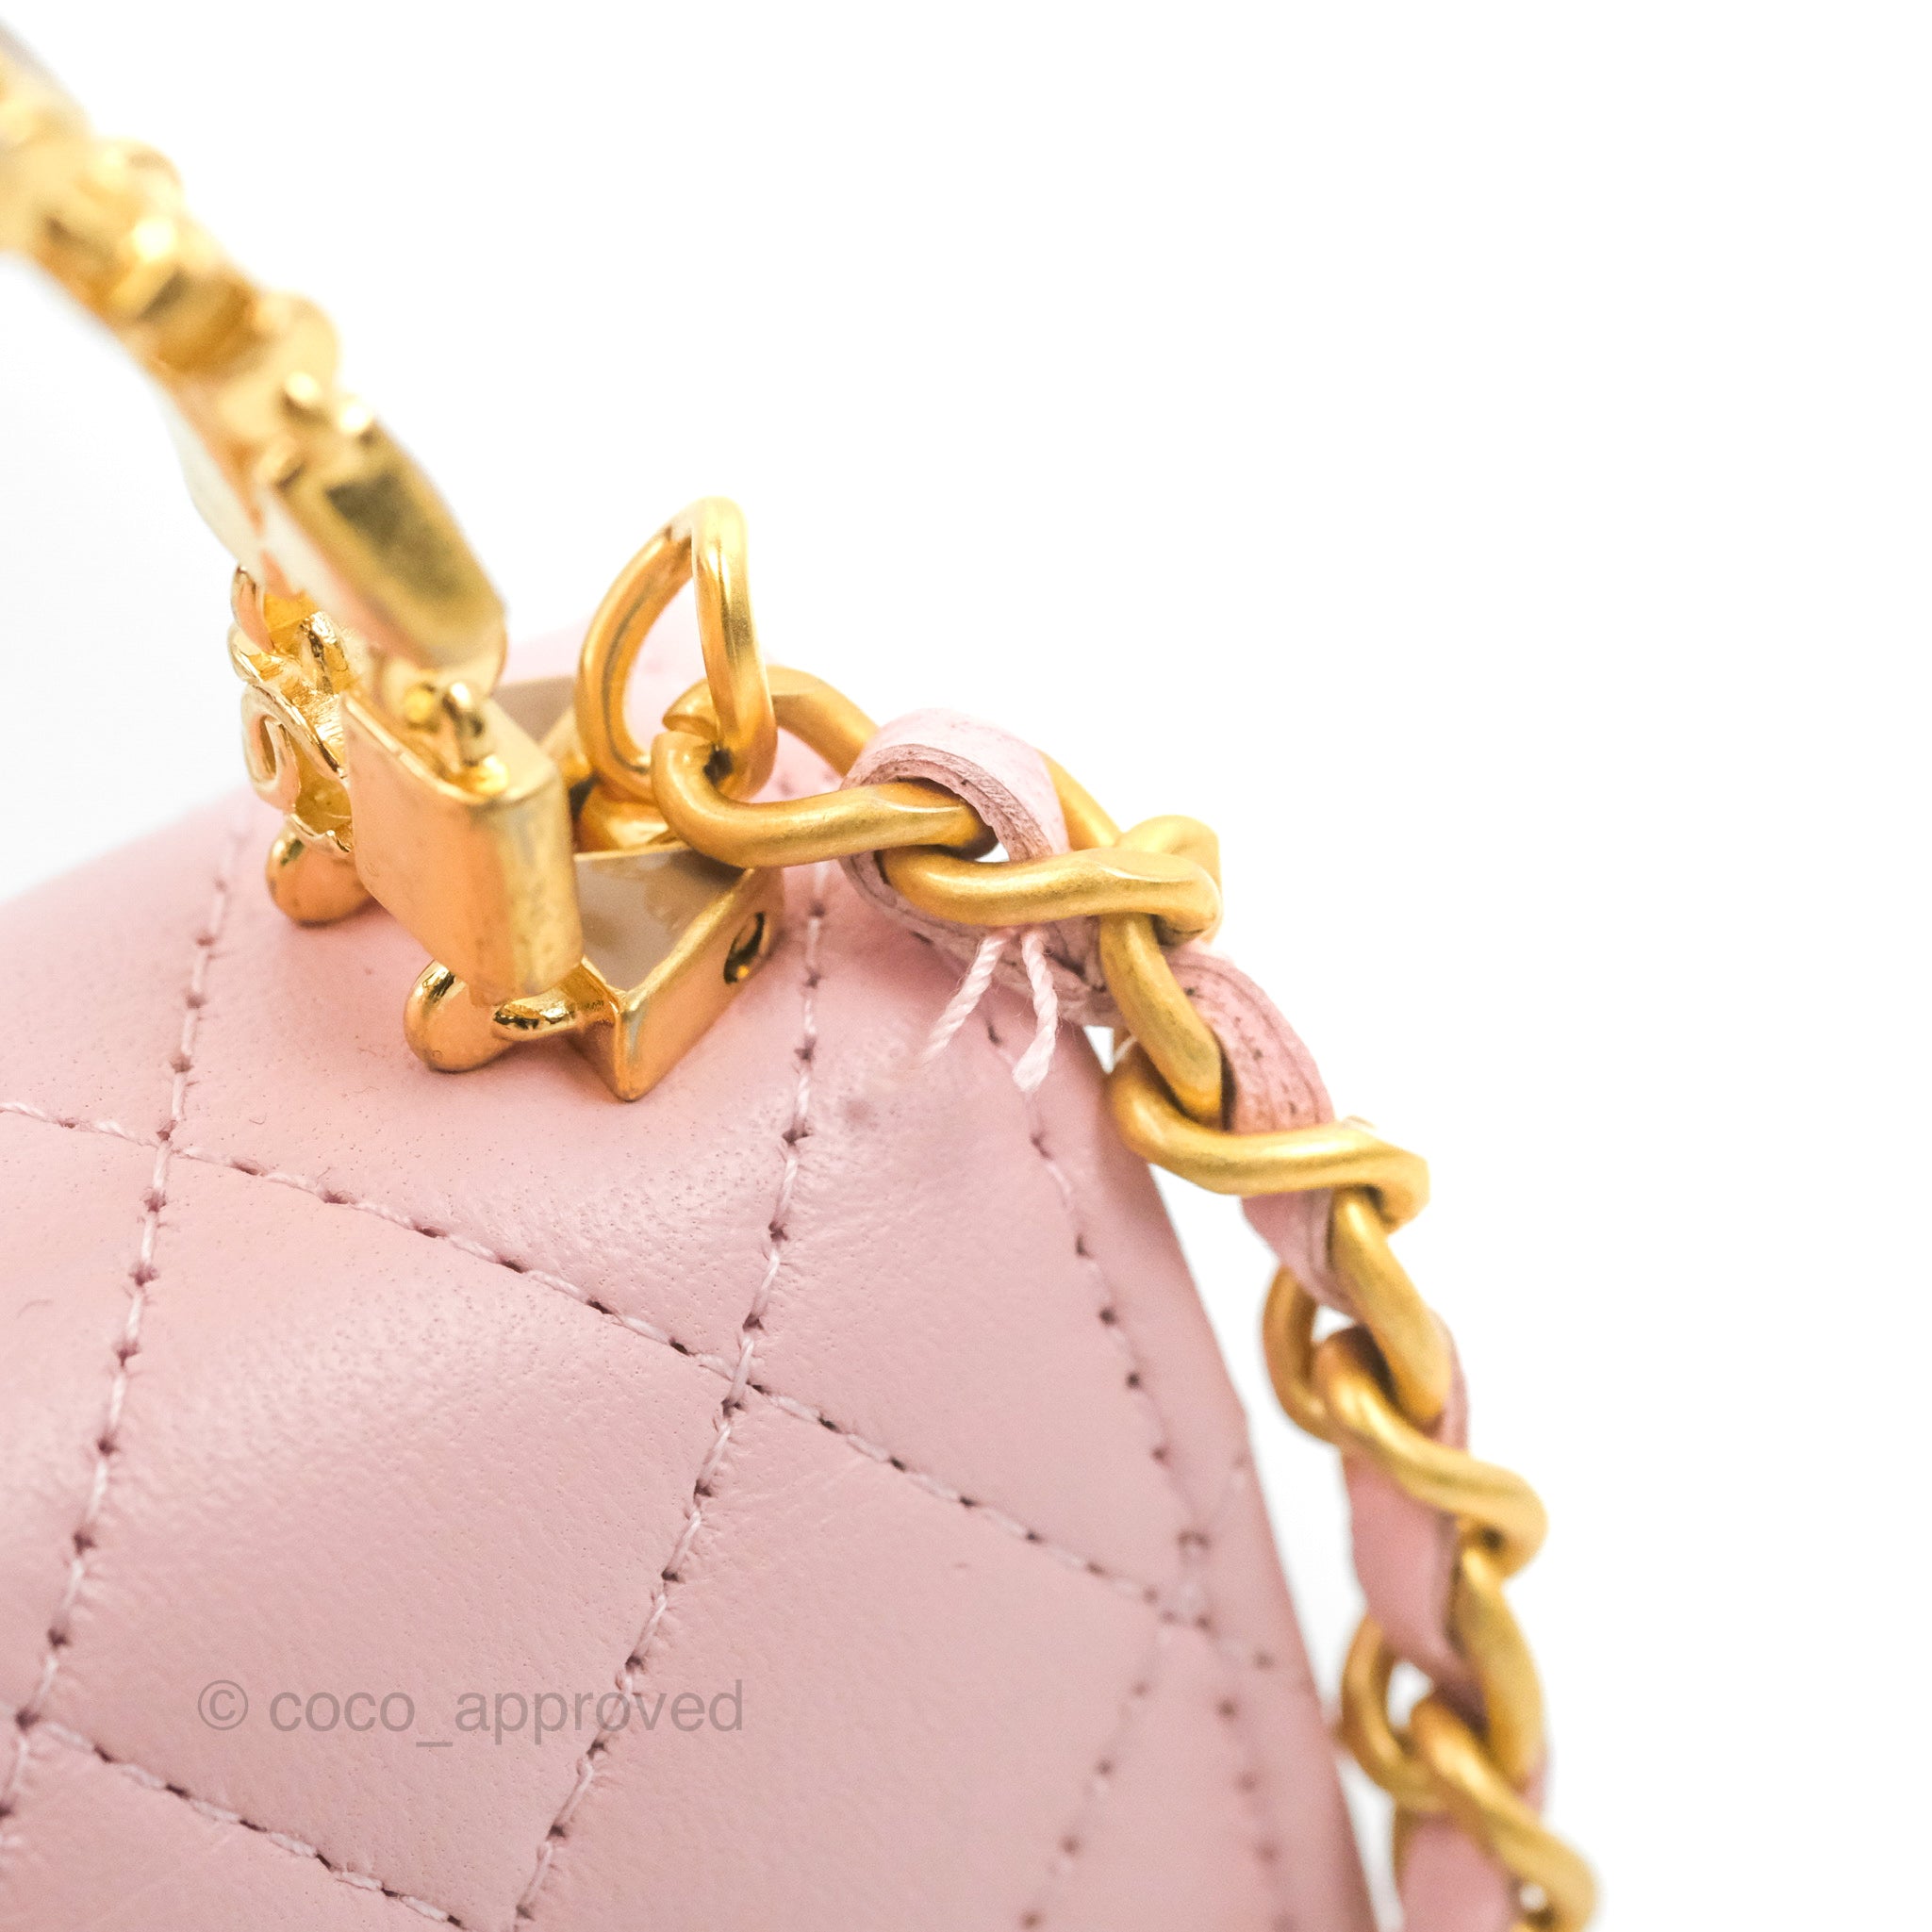 Chanel Enamel Top Handle Clutch with Chain Pink Lambskin Aged Gold